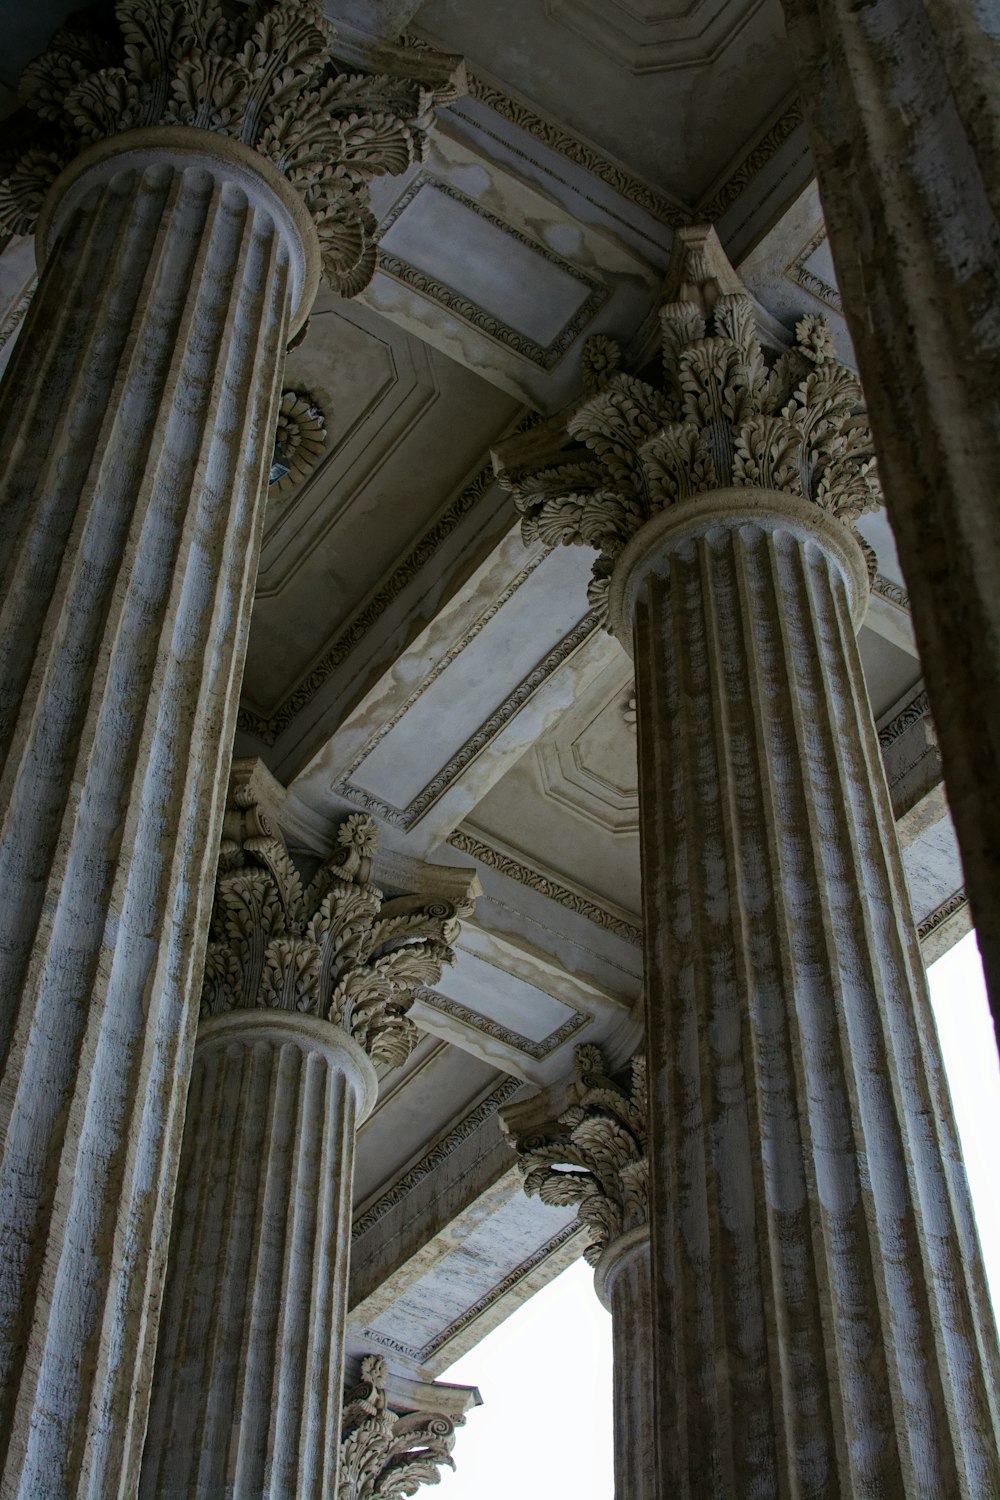 the columns of a building are intricately decorated